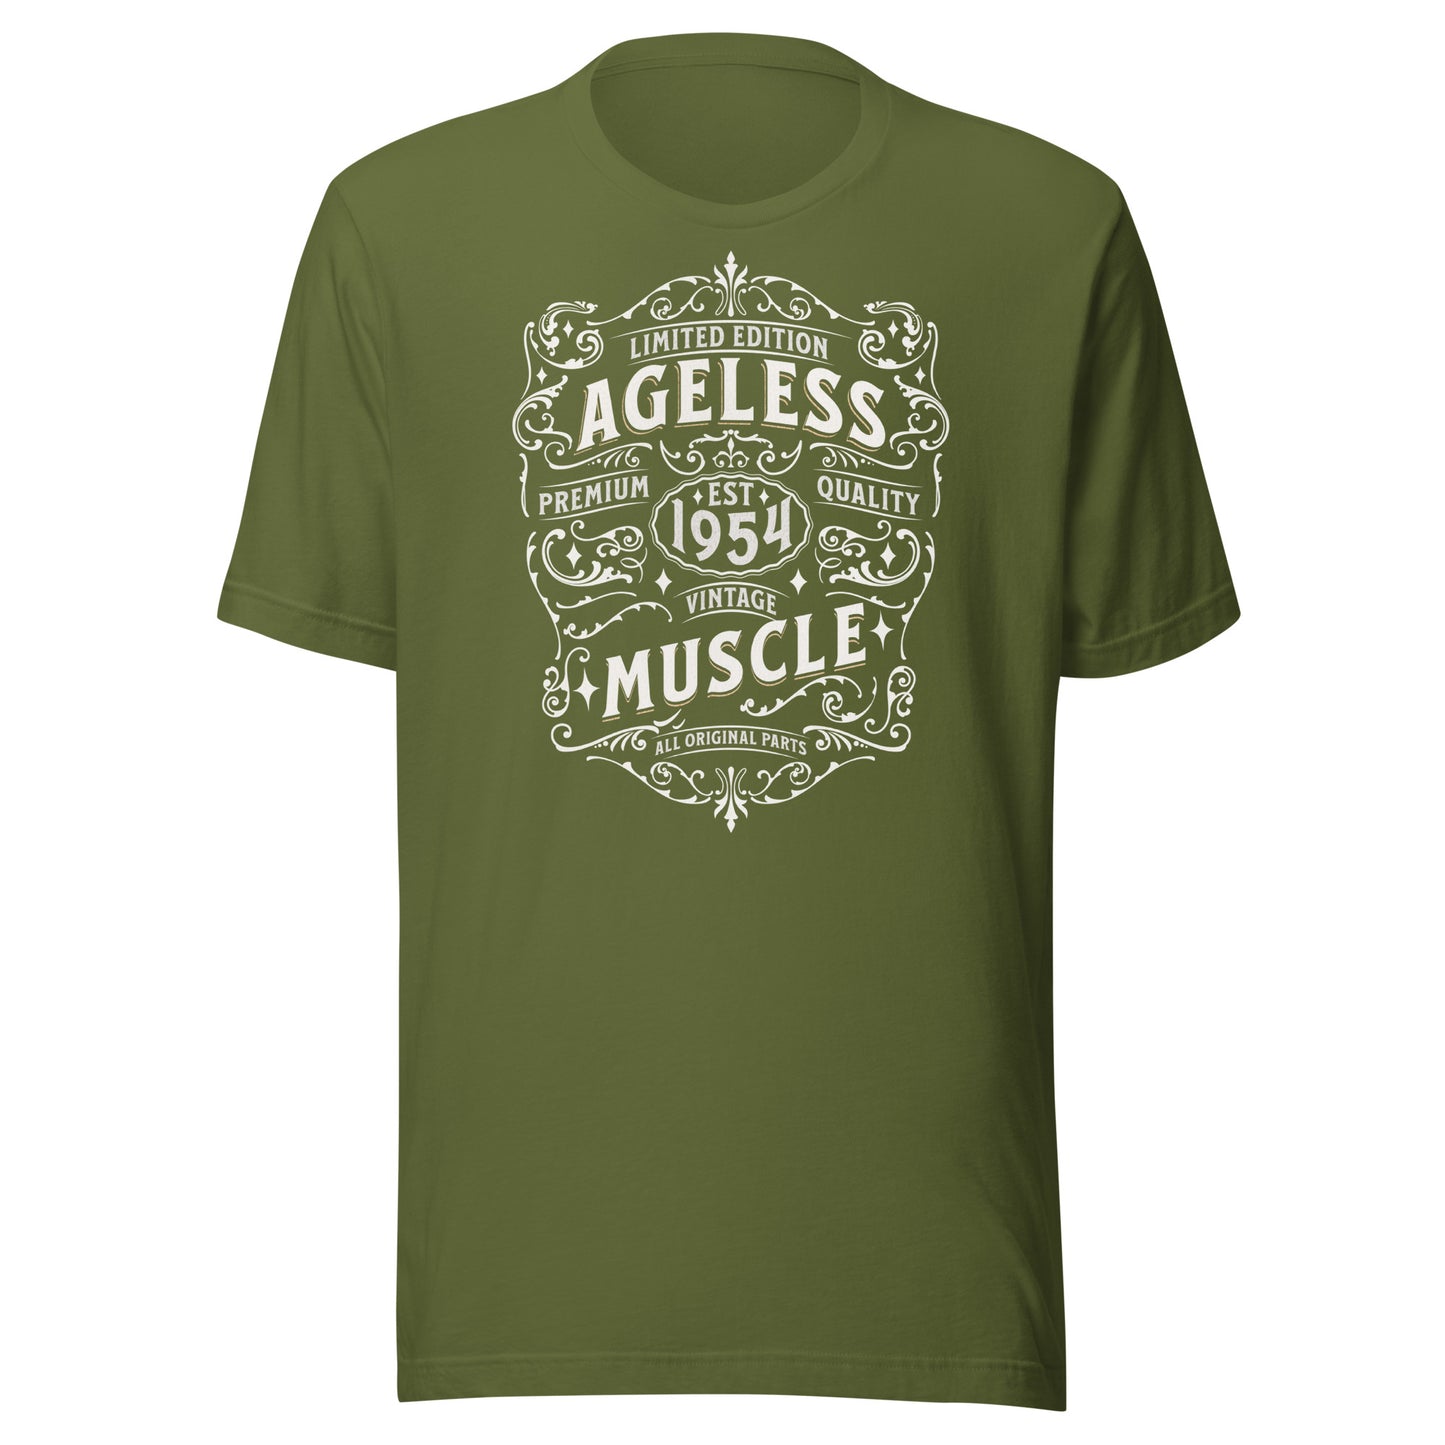 Ageless Muscle 1954: Limited Edition Unisex t-shirt